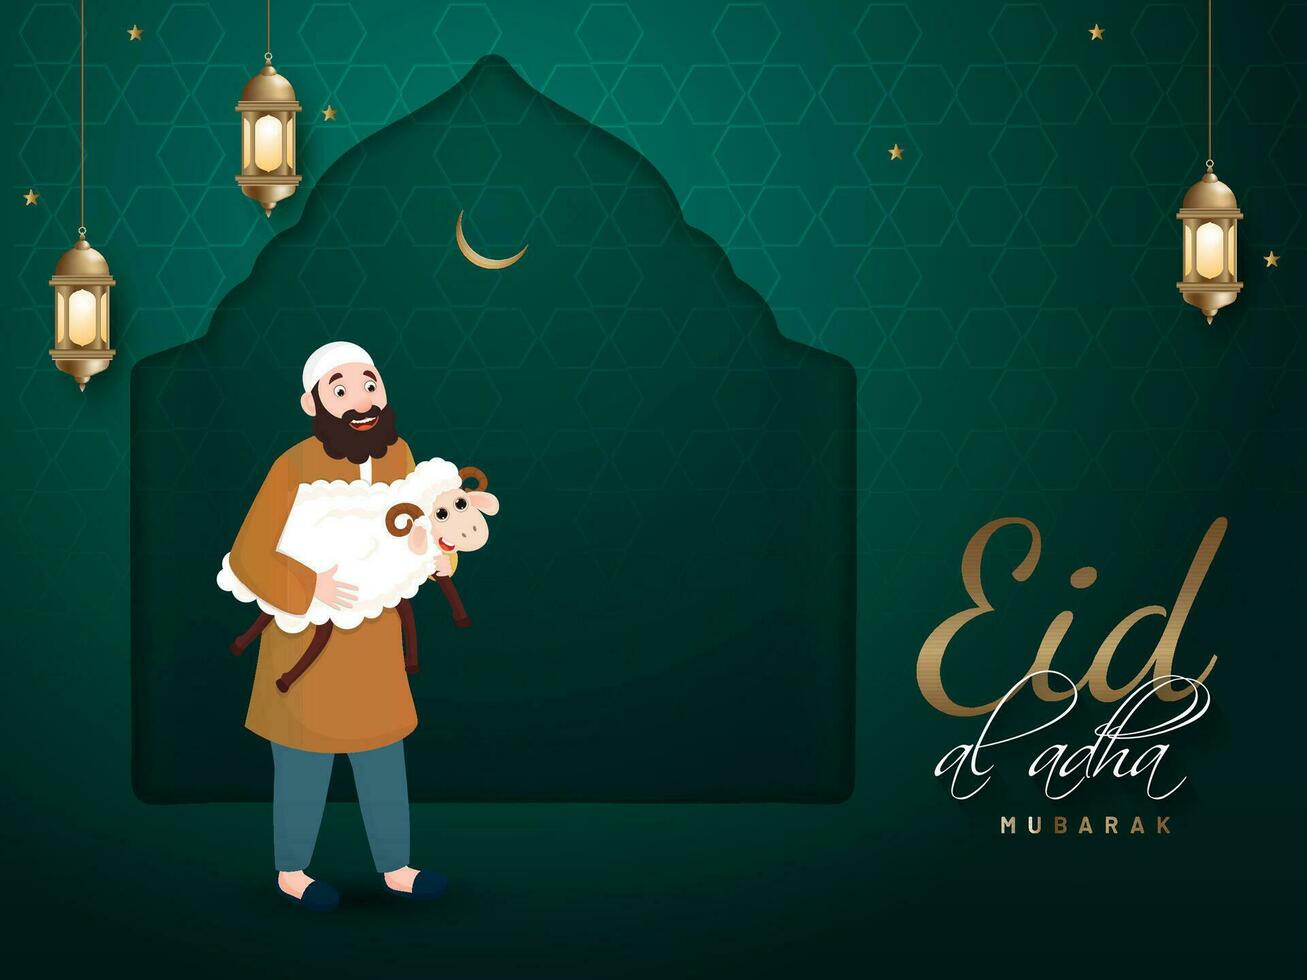 Eid Al Adha Mubarak Concept with Illustration of Cheerful Muslim Man Holding Adorable Sheep and Hanging Golden Lit Lamps on Green Paper Islamic Arch Background. vector